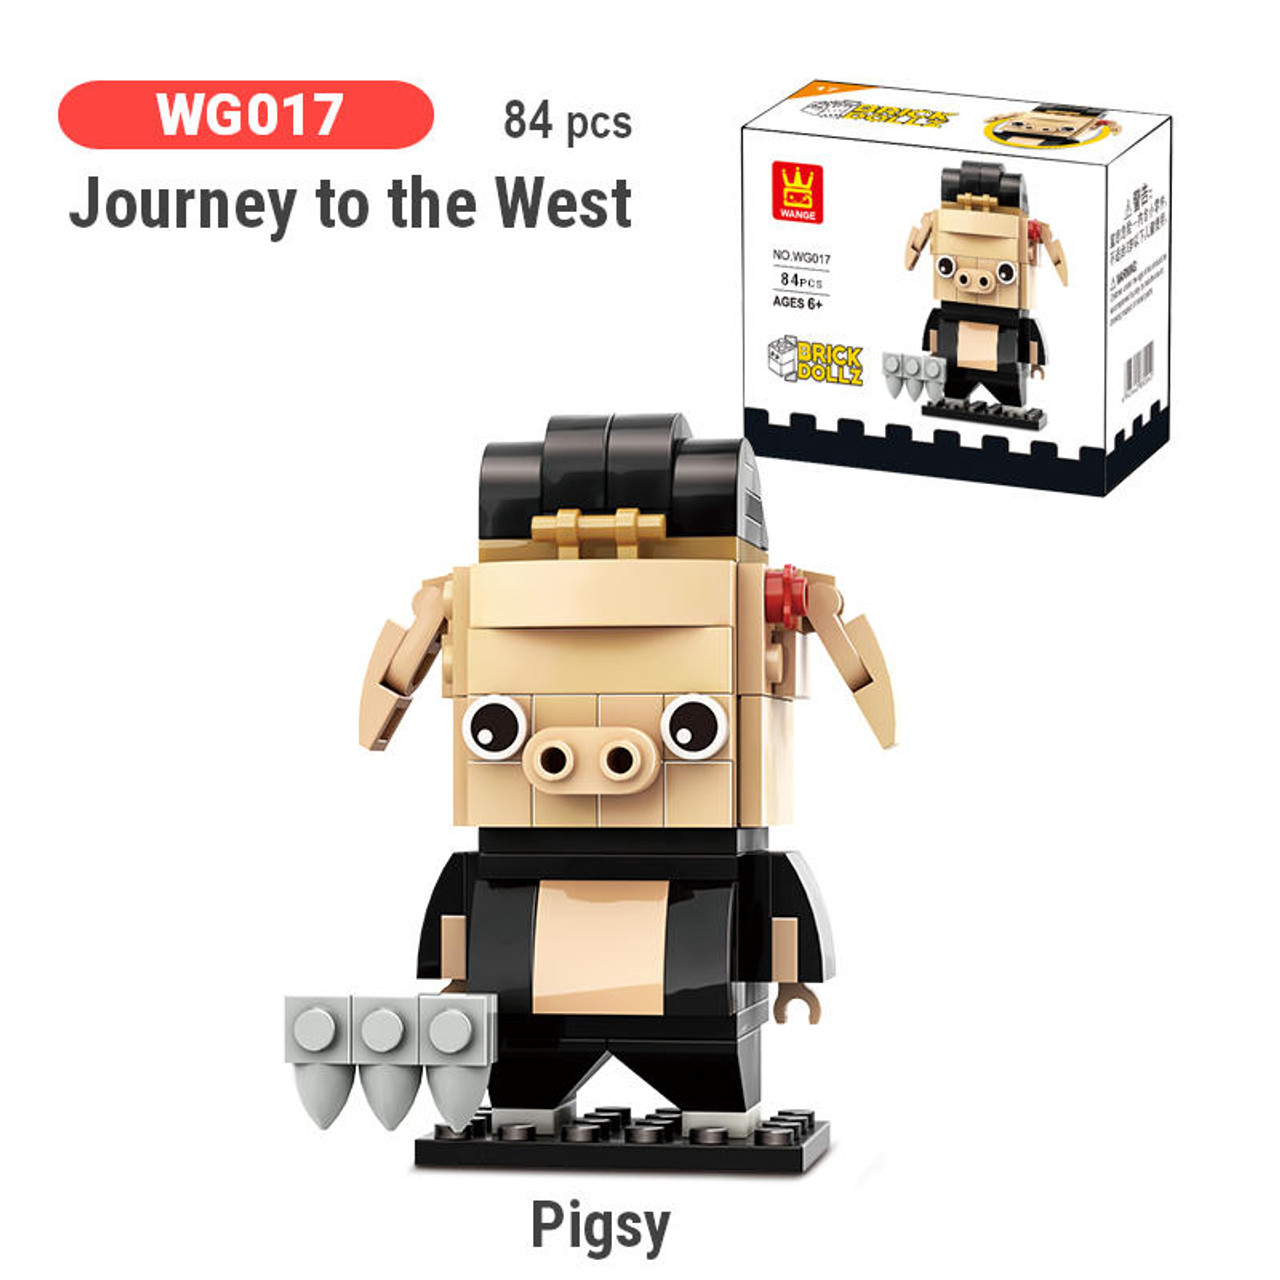 Pigsy, Journey to the West